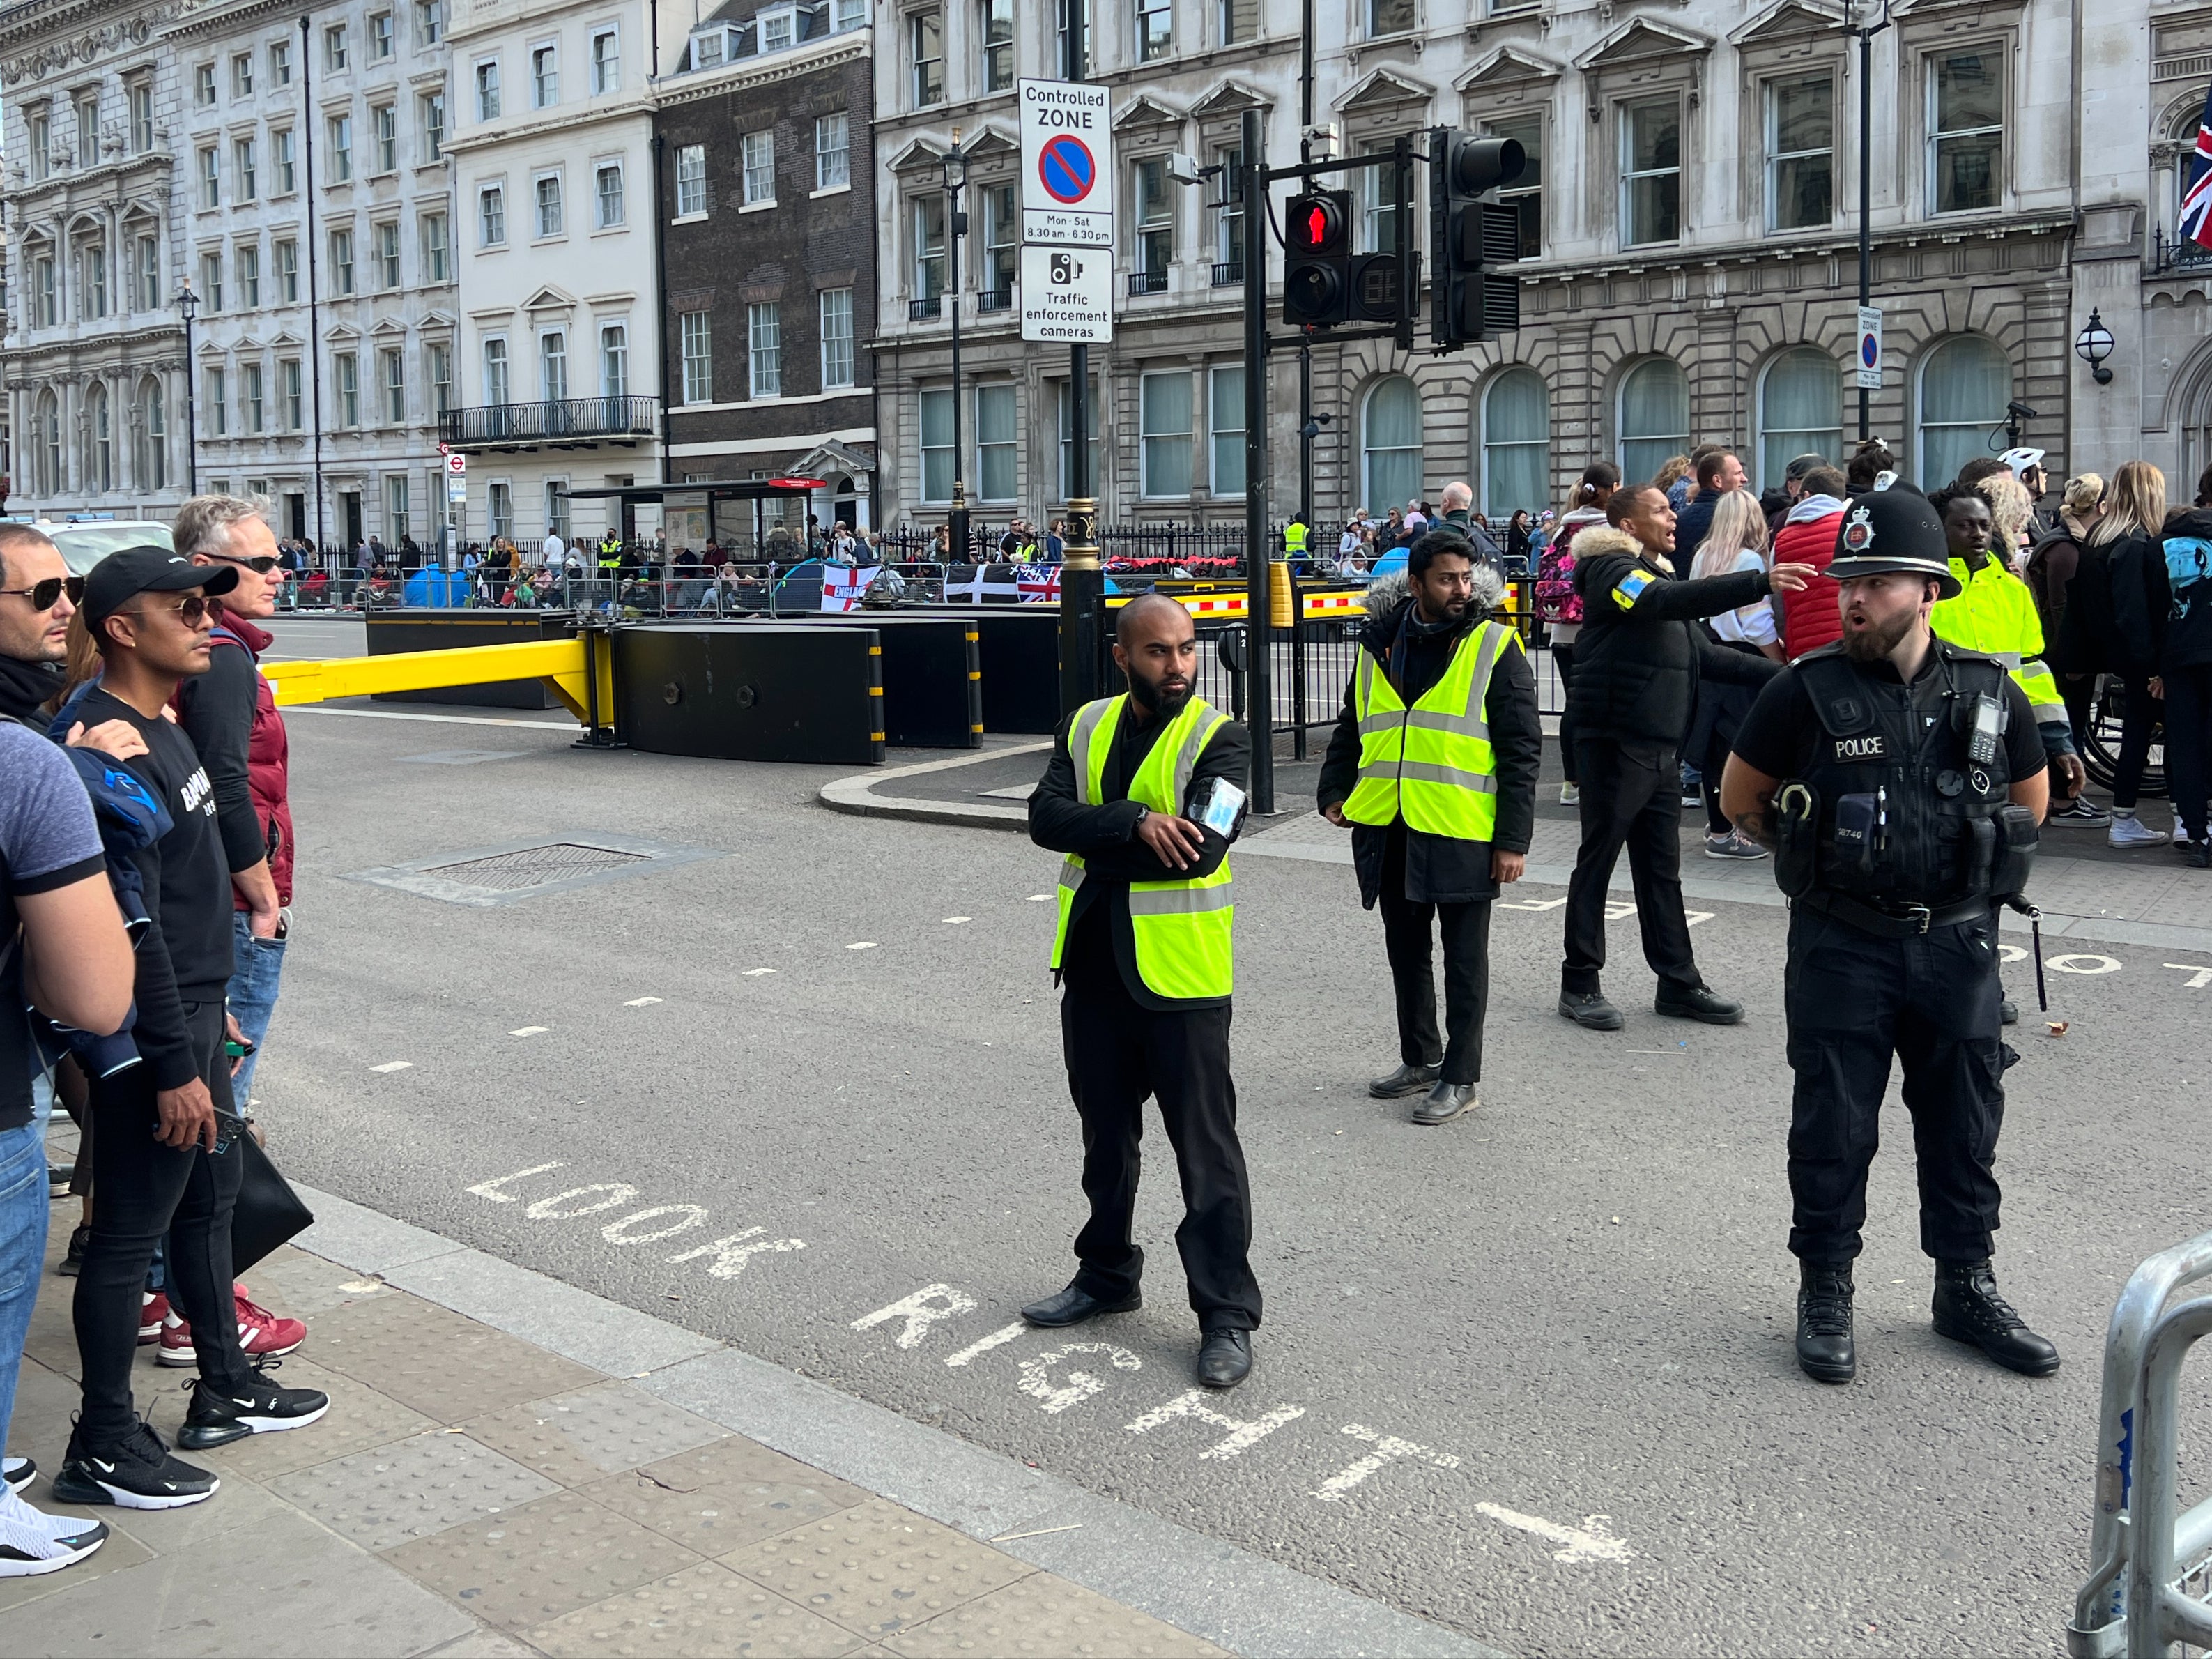 Crowd control: Pedestrians in Westminster on Sunday afternoon